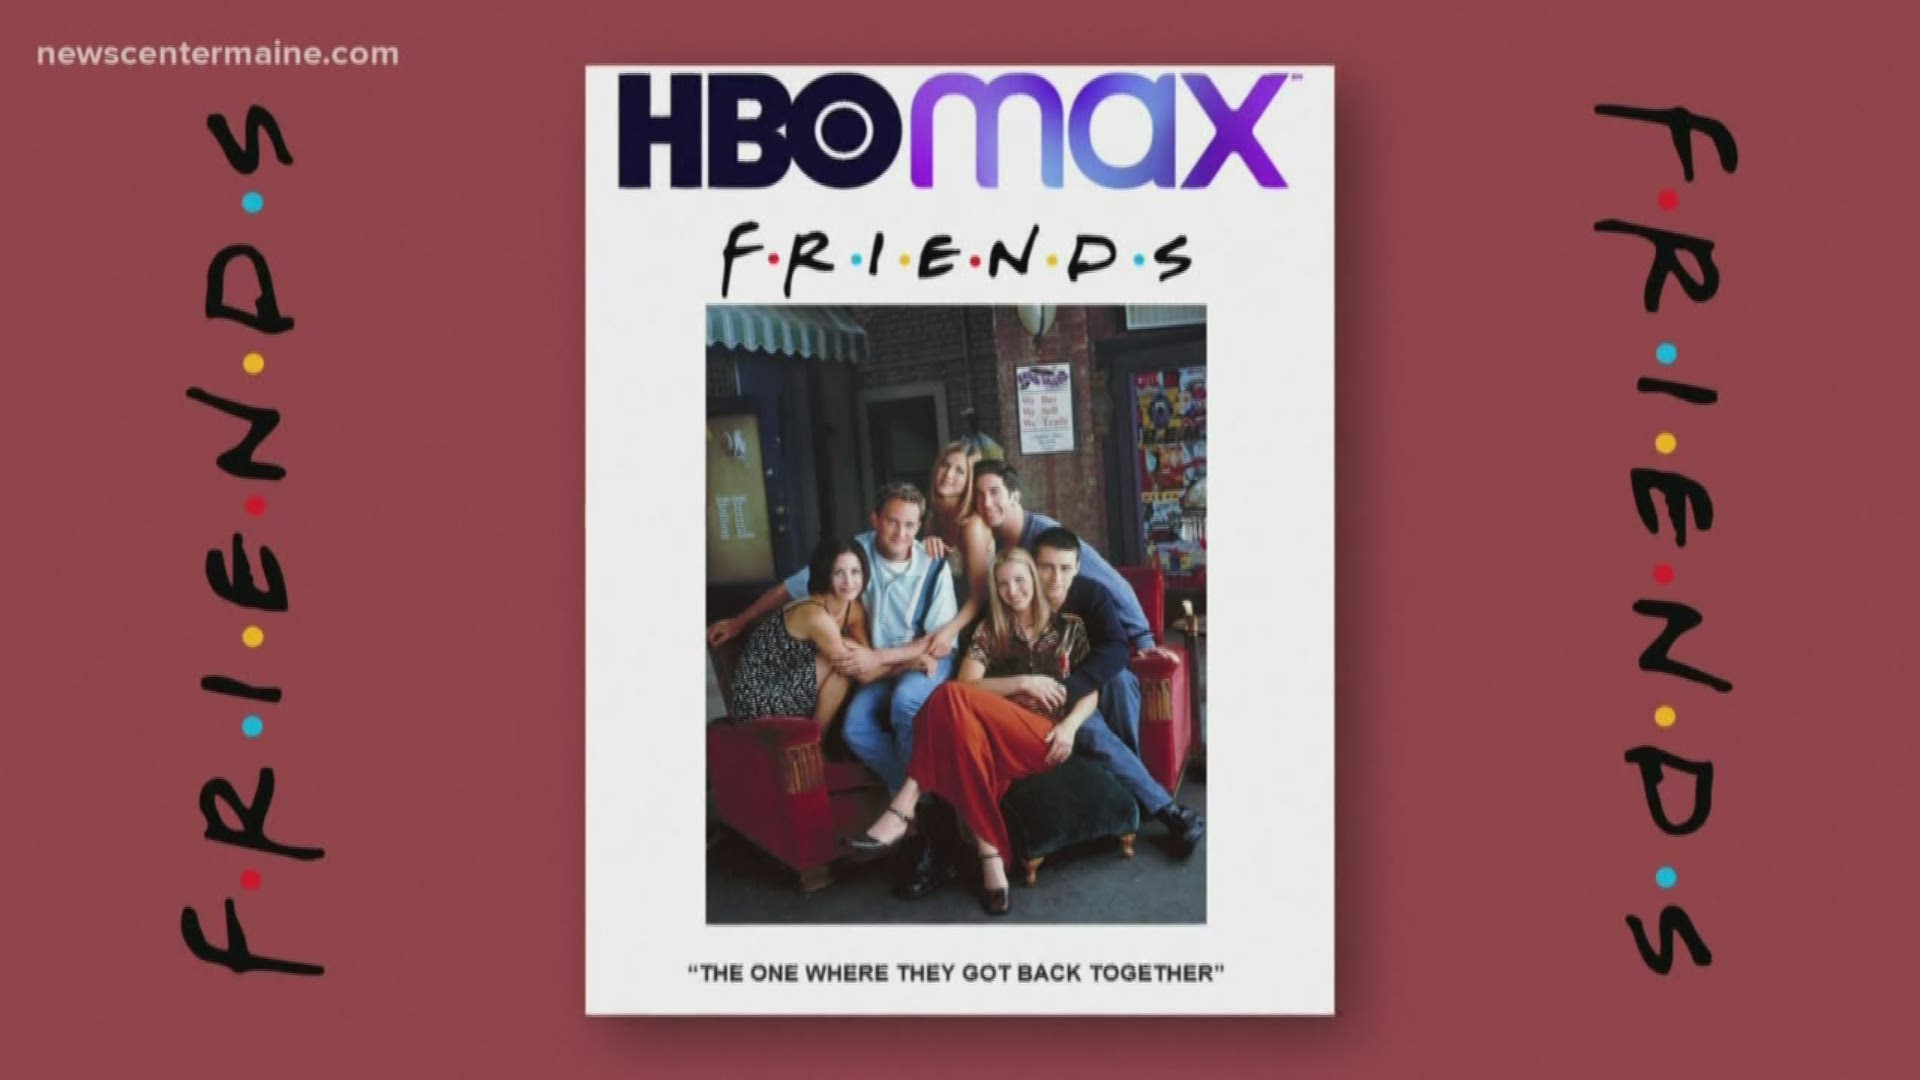 'Friends' is reuniting on HBO Max